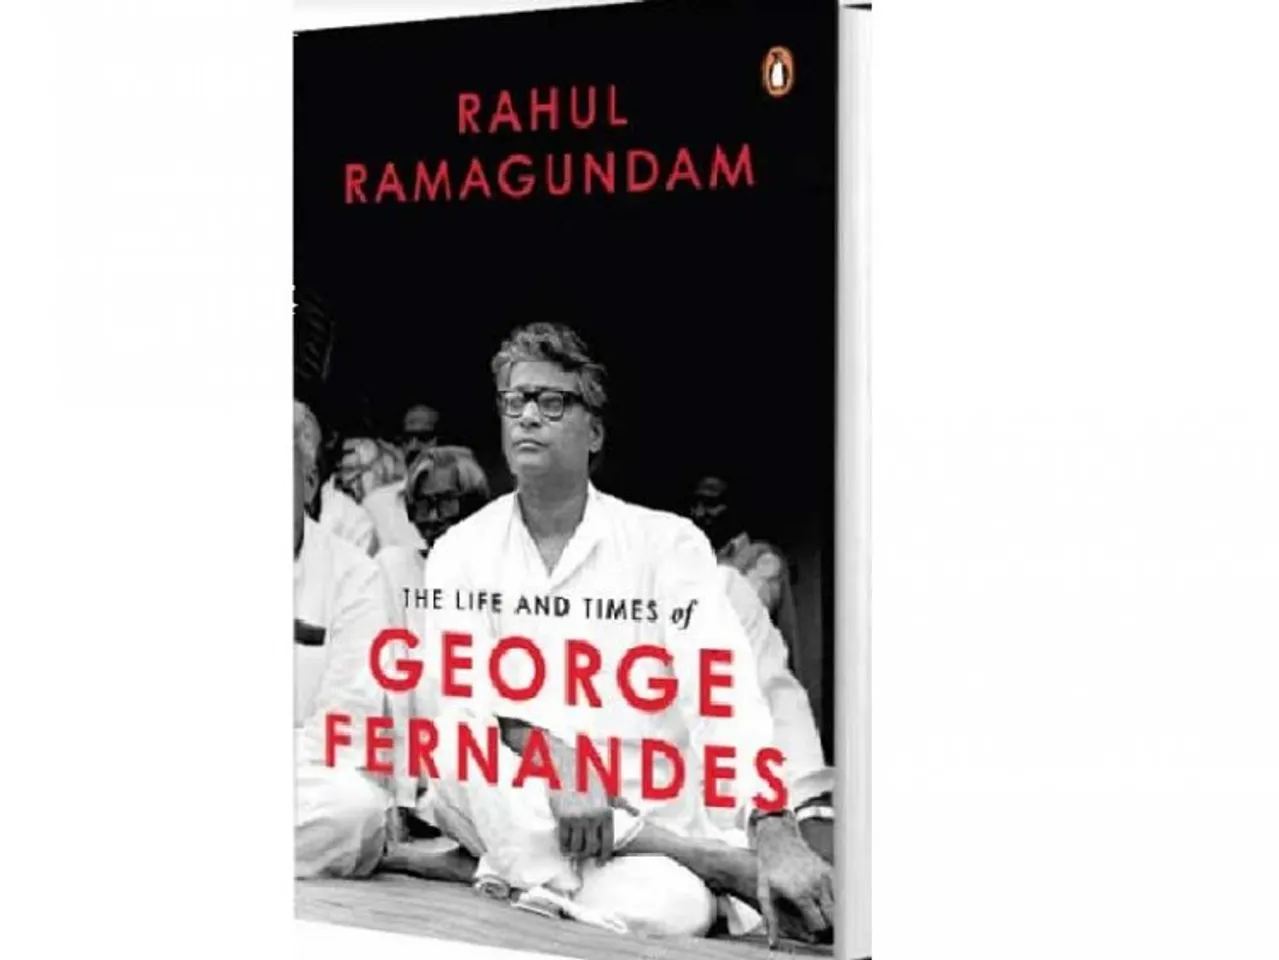 Rahul Ramagundam book 'The Life and Times of George Fernandes' cover page